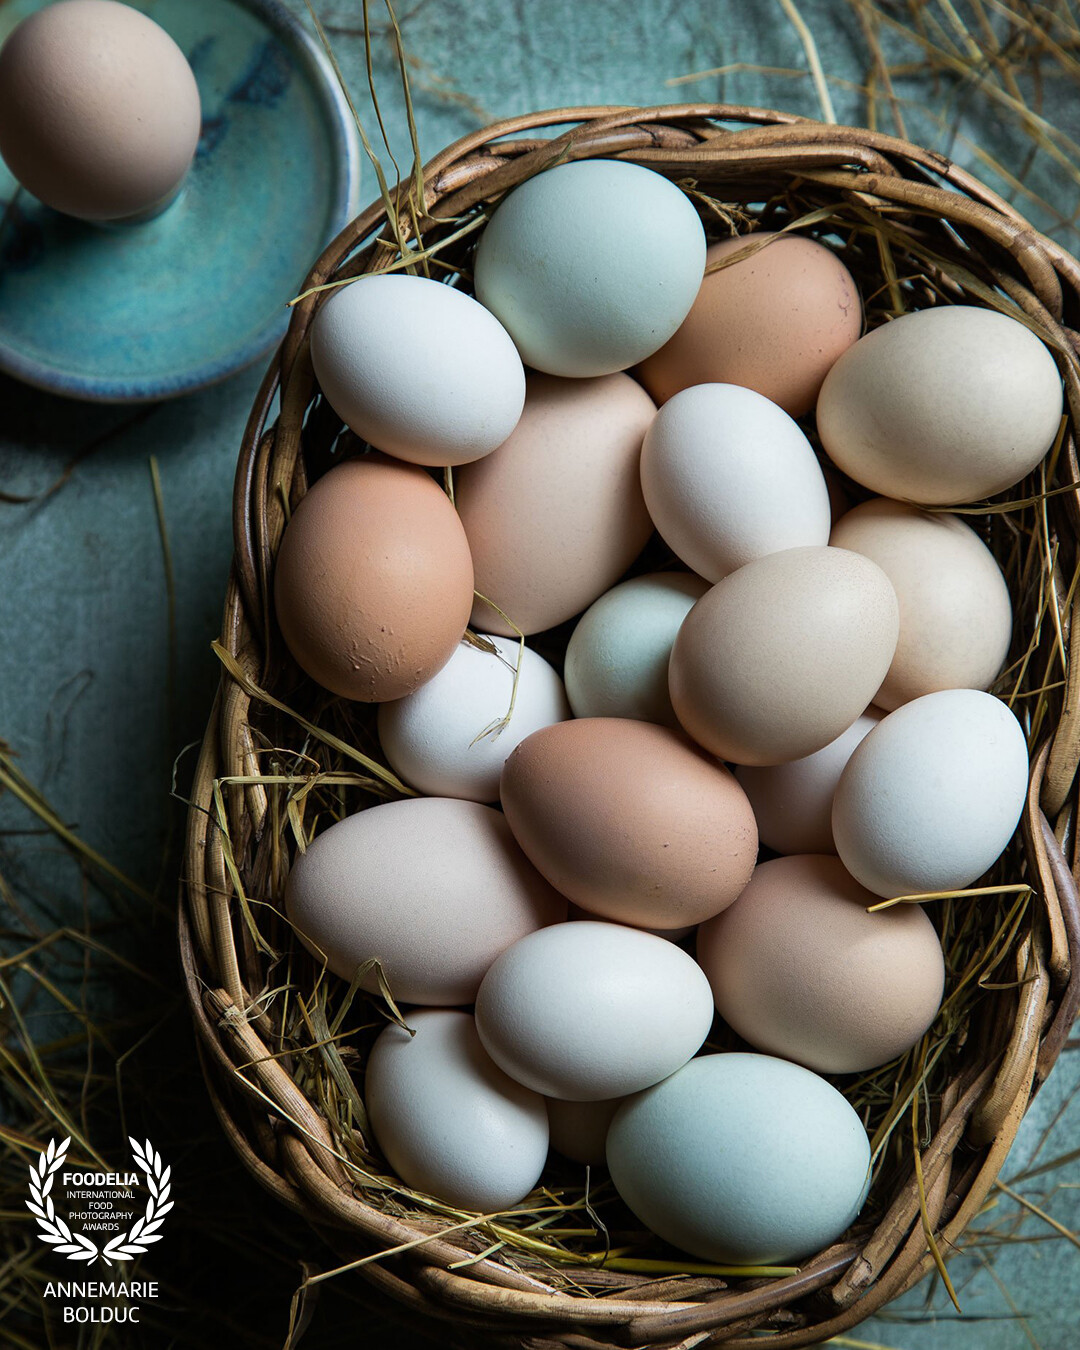 This is a self-assignment photo of my chickens’ eggs, from the backyard. No matter what colour the shell or size of the eggs, the yolks are all yellow and delicious!